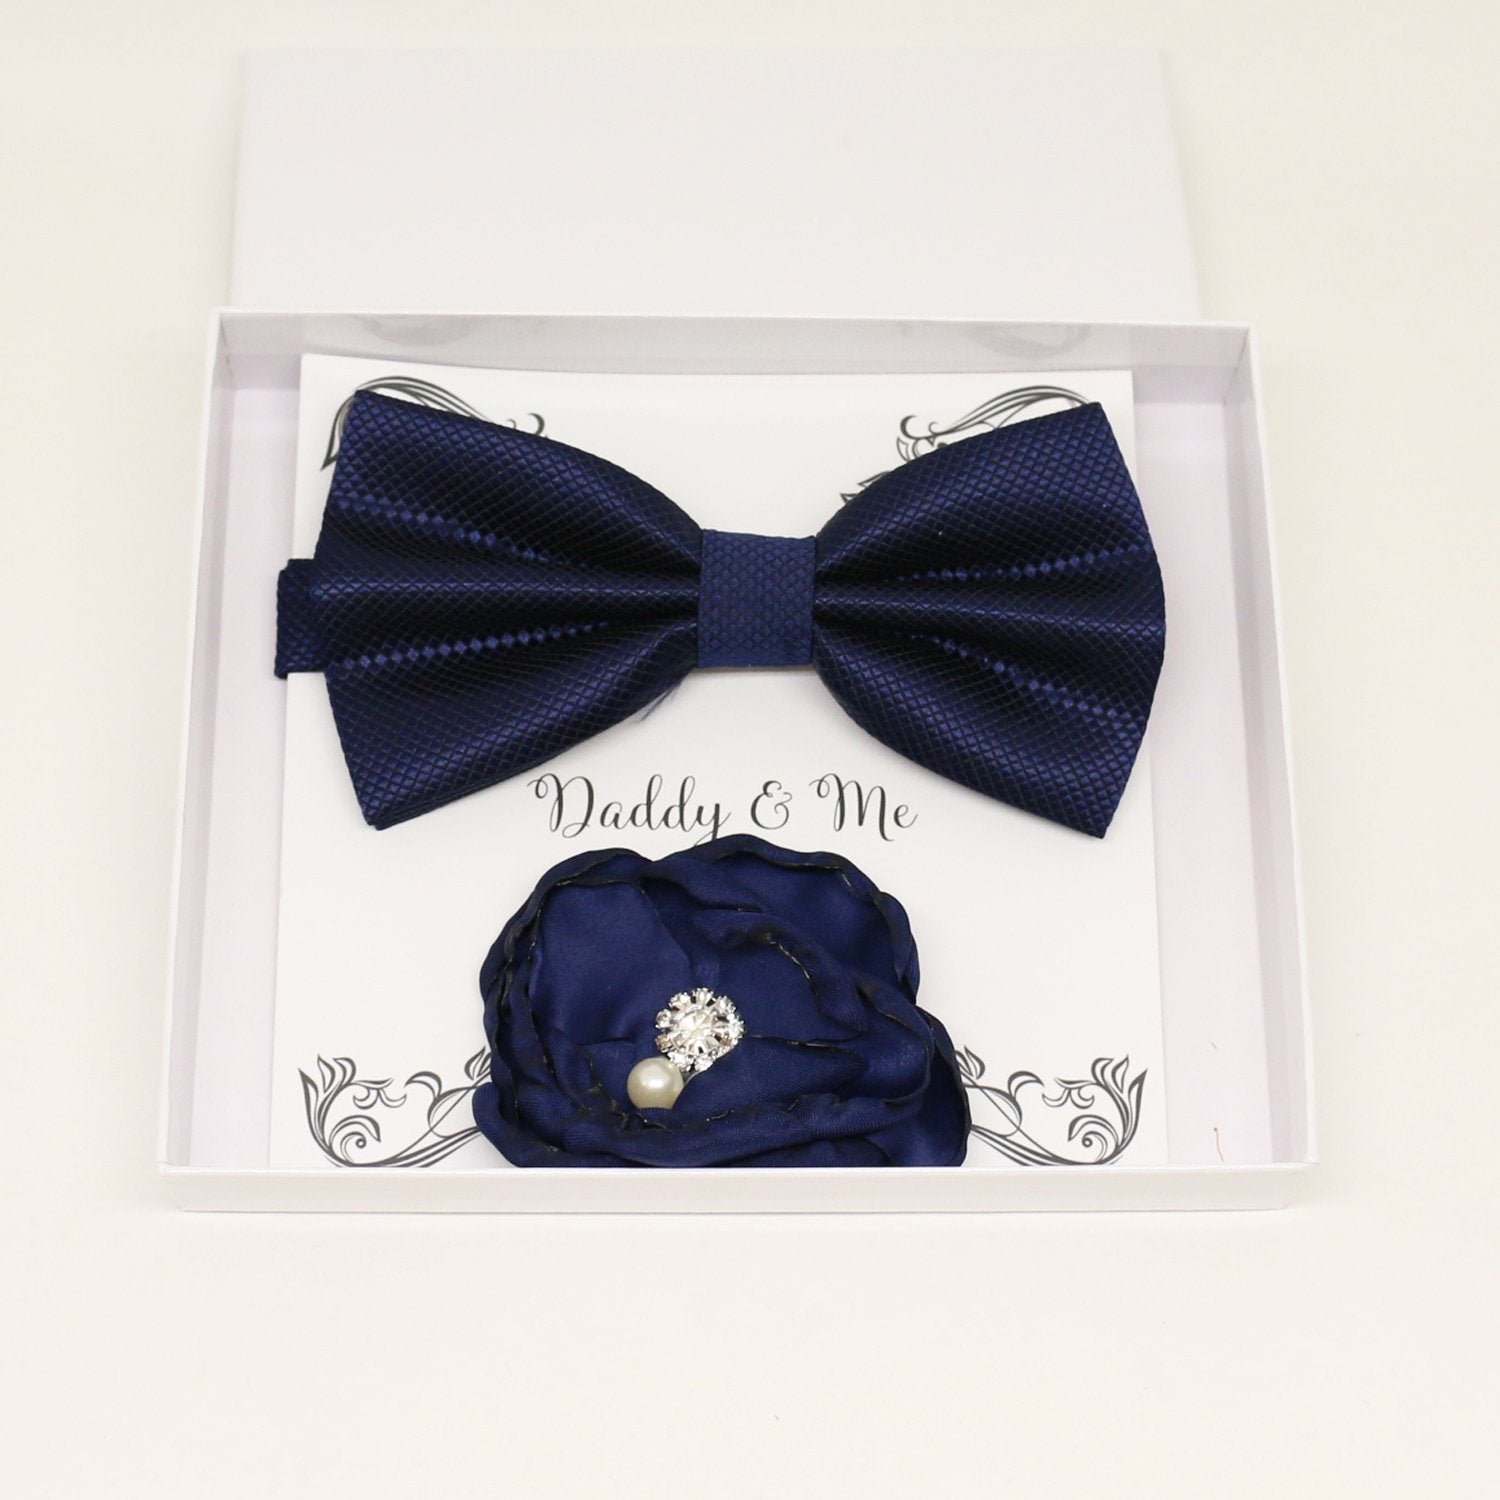 Navy Bow tie and hair clip set for daddy daugher, Daddy me gift set, Grandpa and me, Father daughter match, Navy bow, Navy flower hair clip